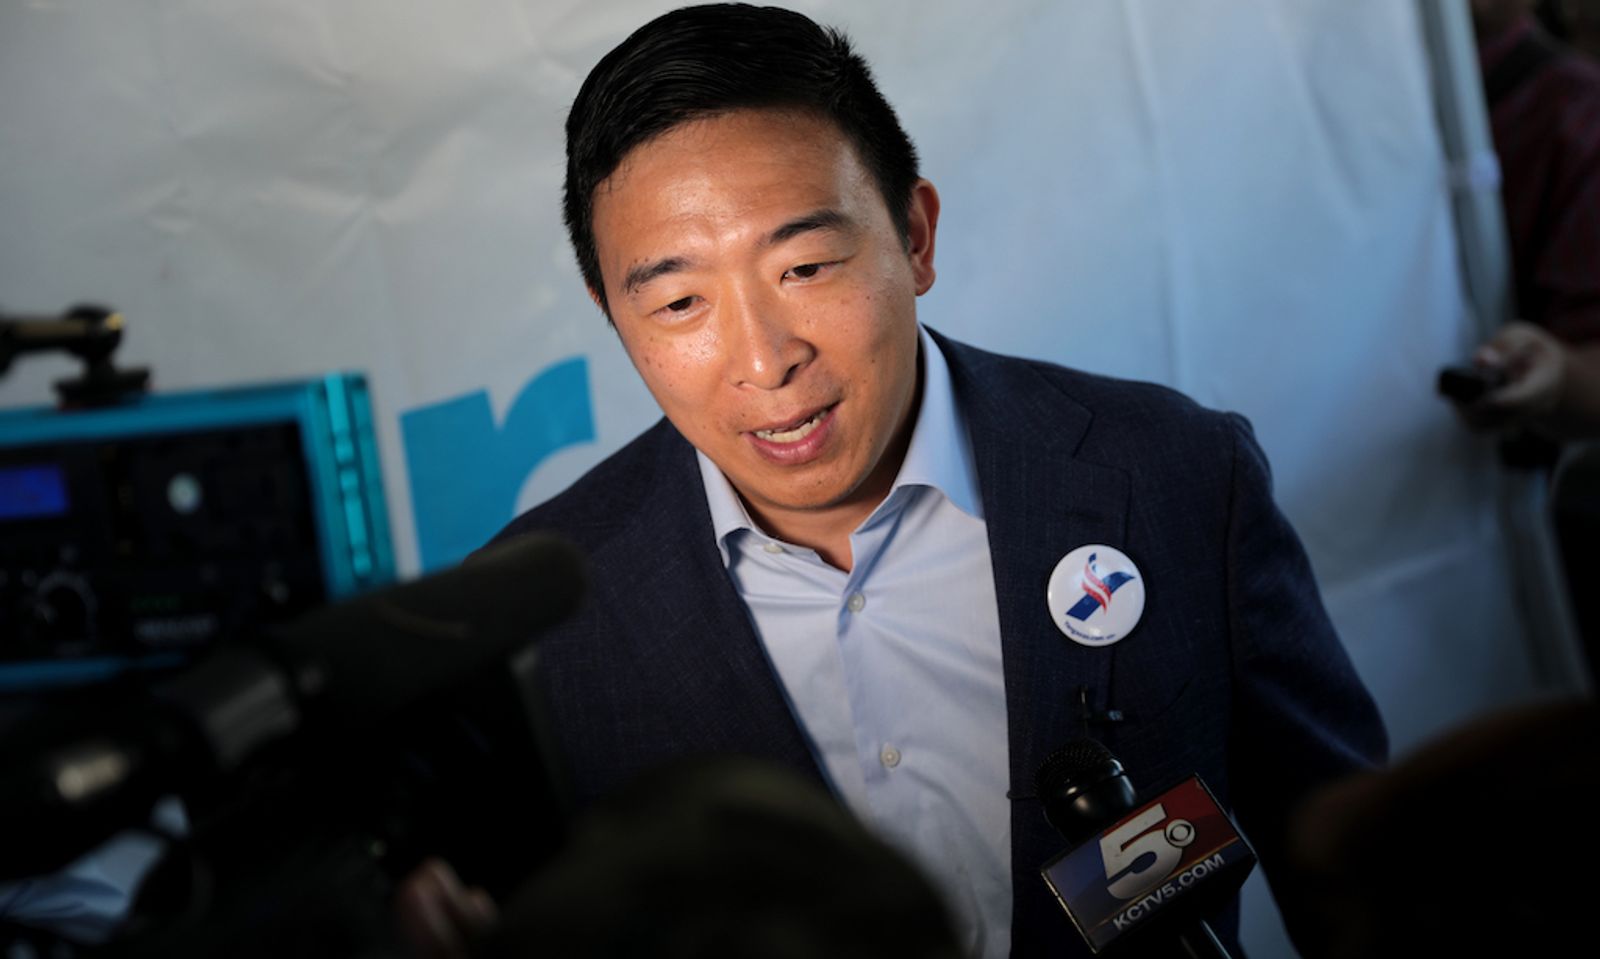 Andrew Yang Wants Sex Work Decriminalized, Only for ‘Seller’